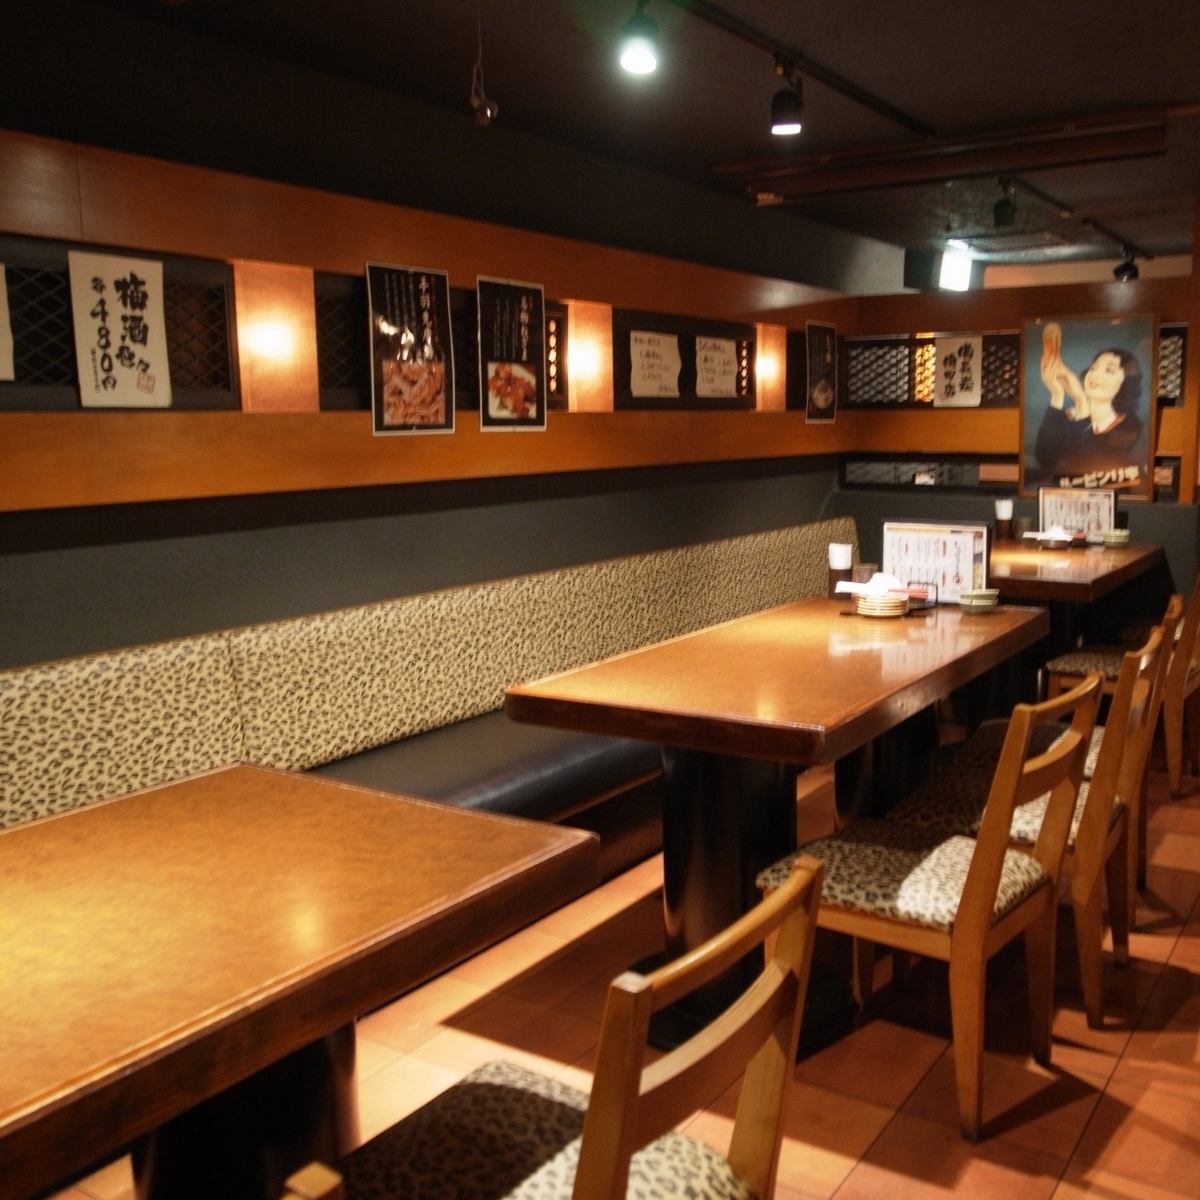 The tatami room can accommodate up to 30 people.